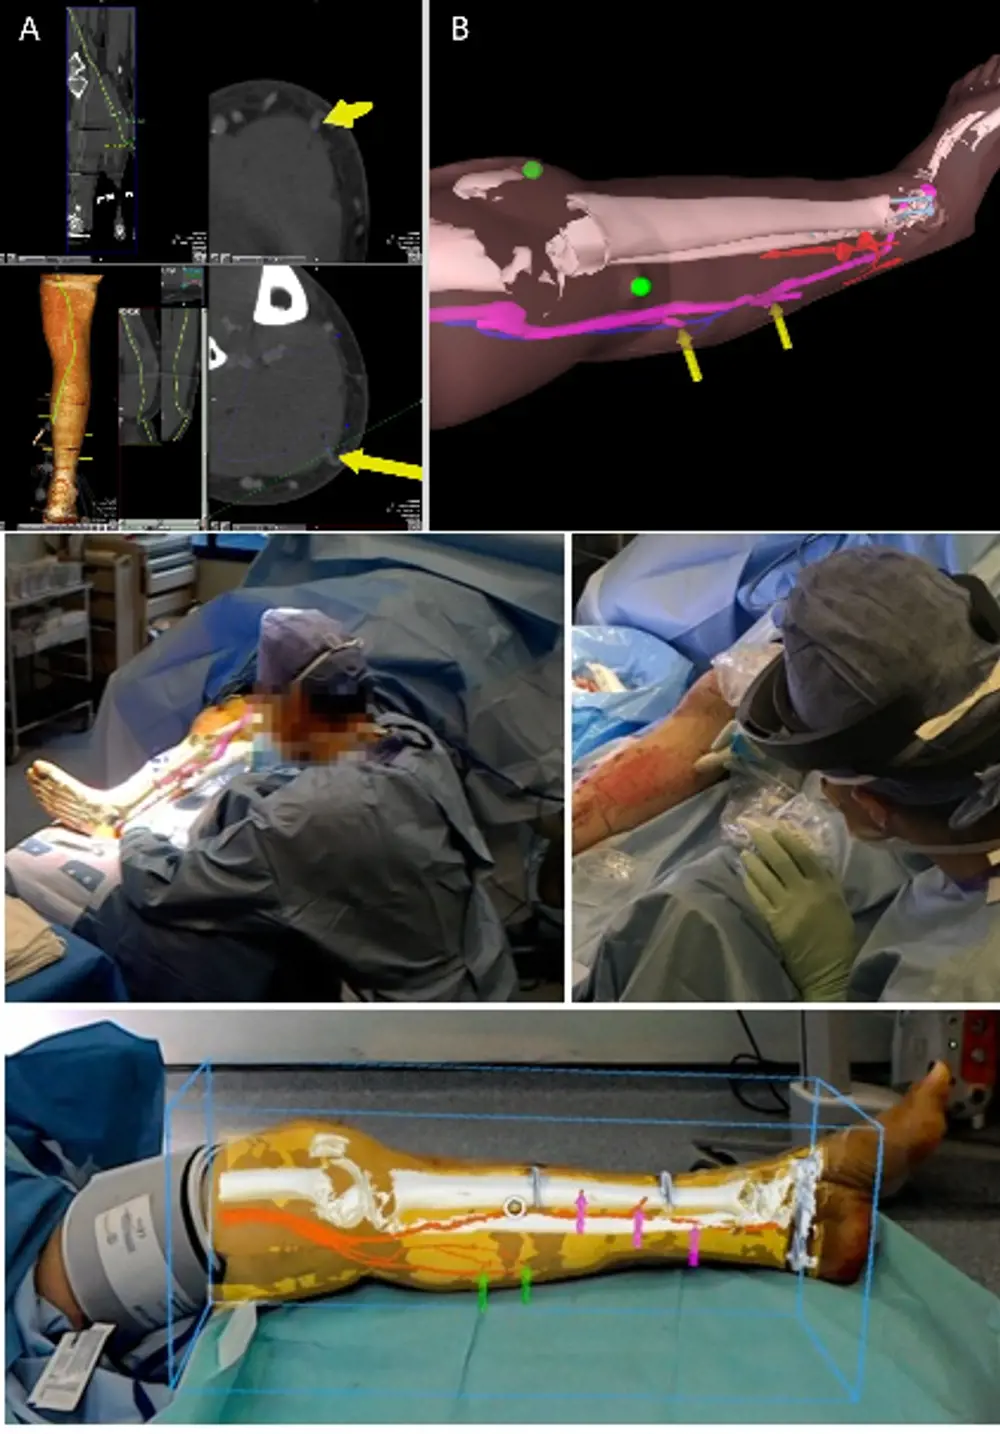 A medical scan with indicated injuries on arm and leg (top). A surgeon using augmented reality headsets from HoloLens that overlay where the injuries are onto the patient in an operating theatre on the arm and leg (middle and bottom).